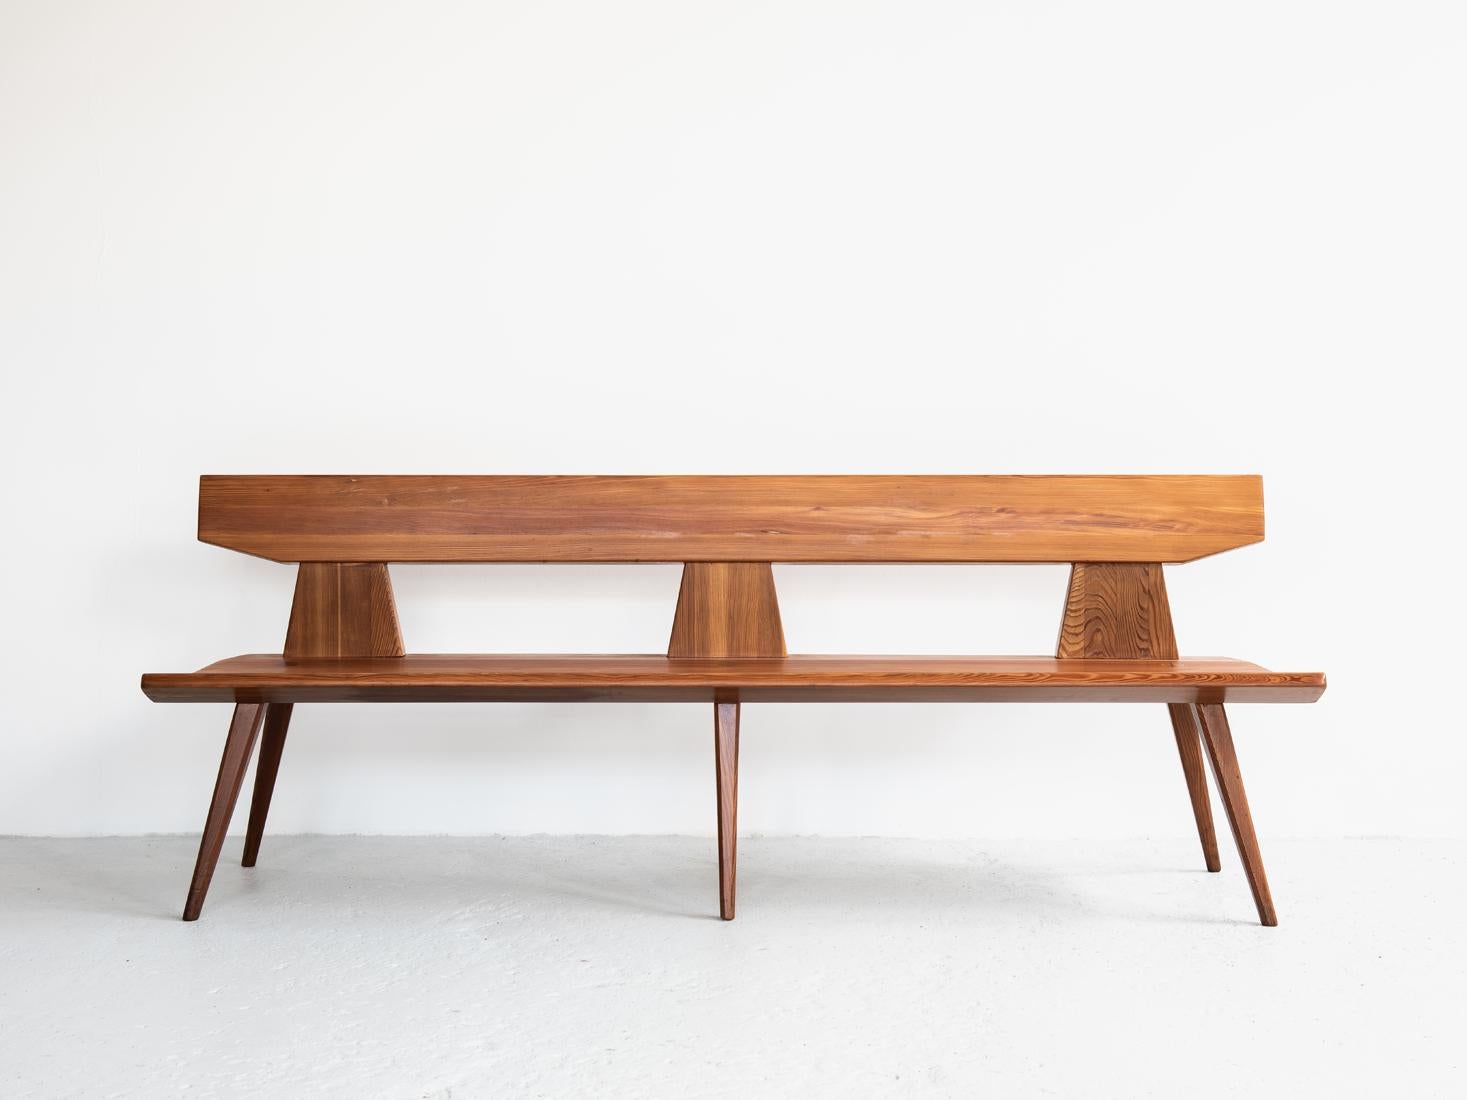 This midcentury bench is designed by Jacob Kielland Brandt and manufactured by I. Christiansen in Denmark in the 1960s. It is a special piece! The bench is made of solid pine wood and is in very good condition.